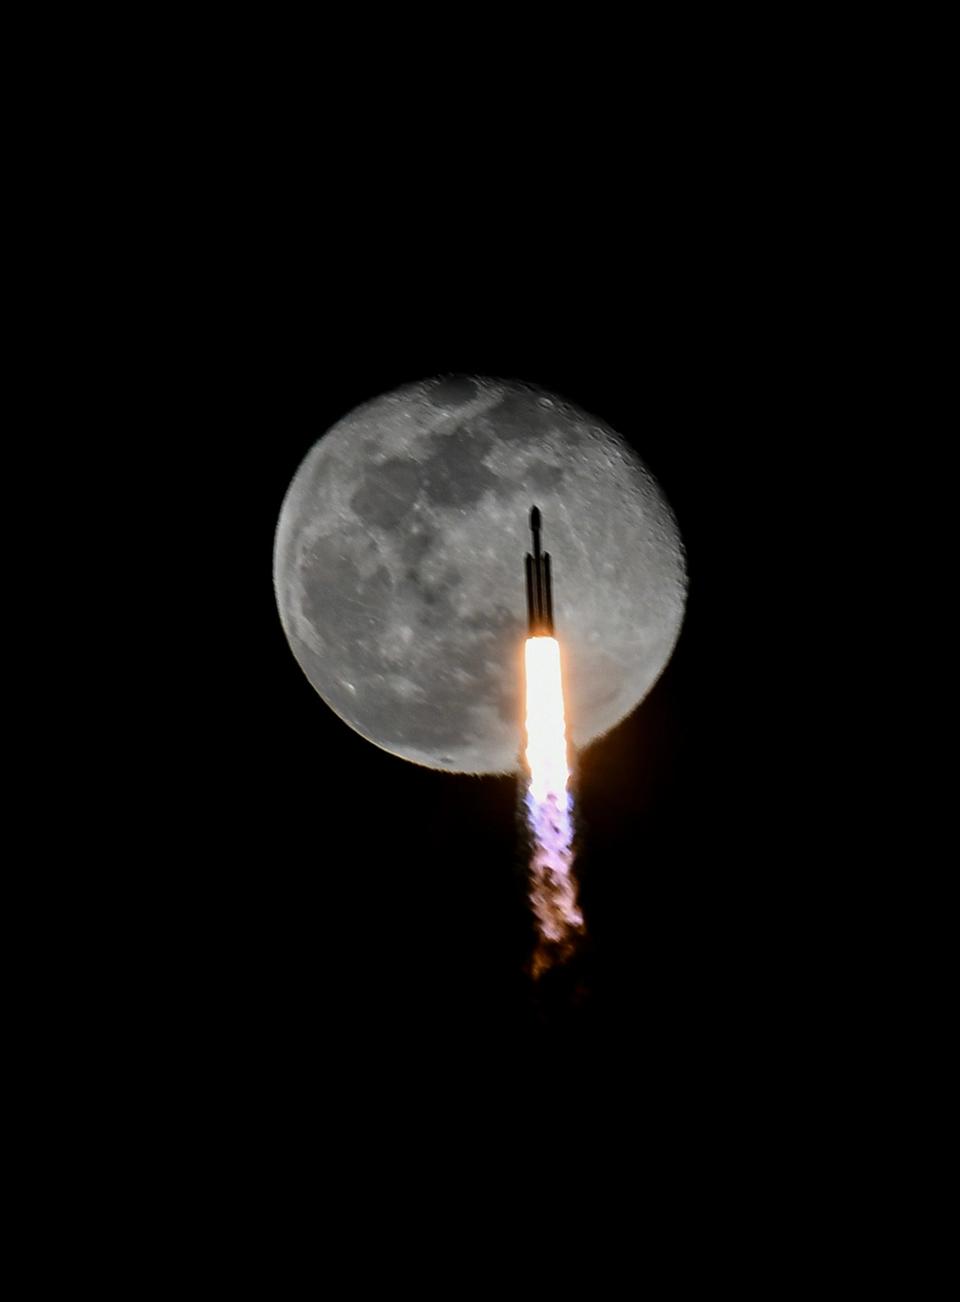 A SpaceX Falcon Heavy rocket flies across the face of the moon after its 8:07 p.m. liftoff from Kennedy Space Center.